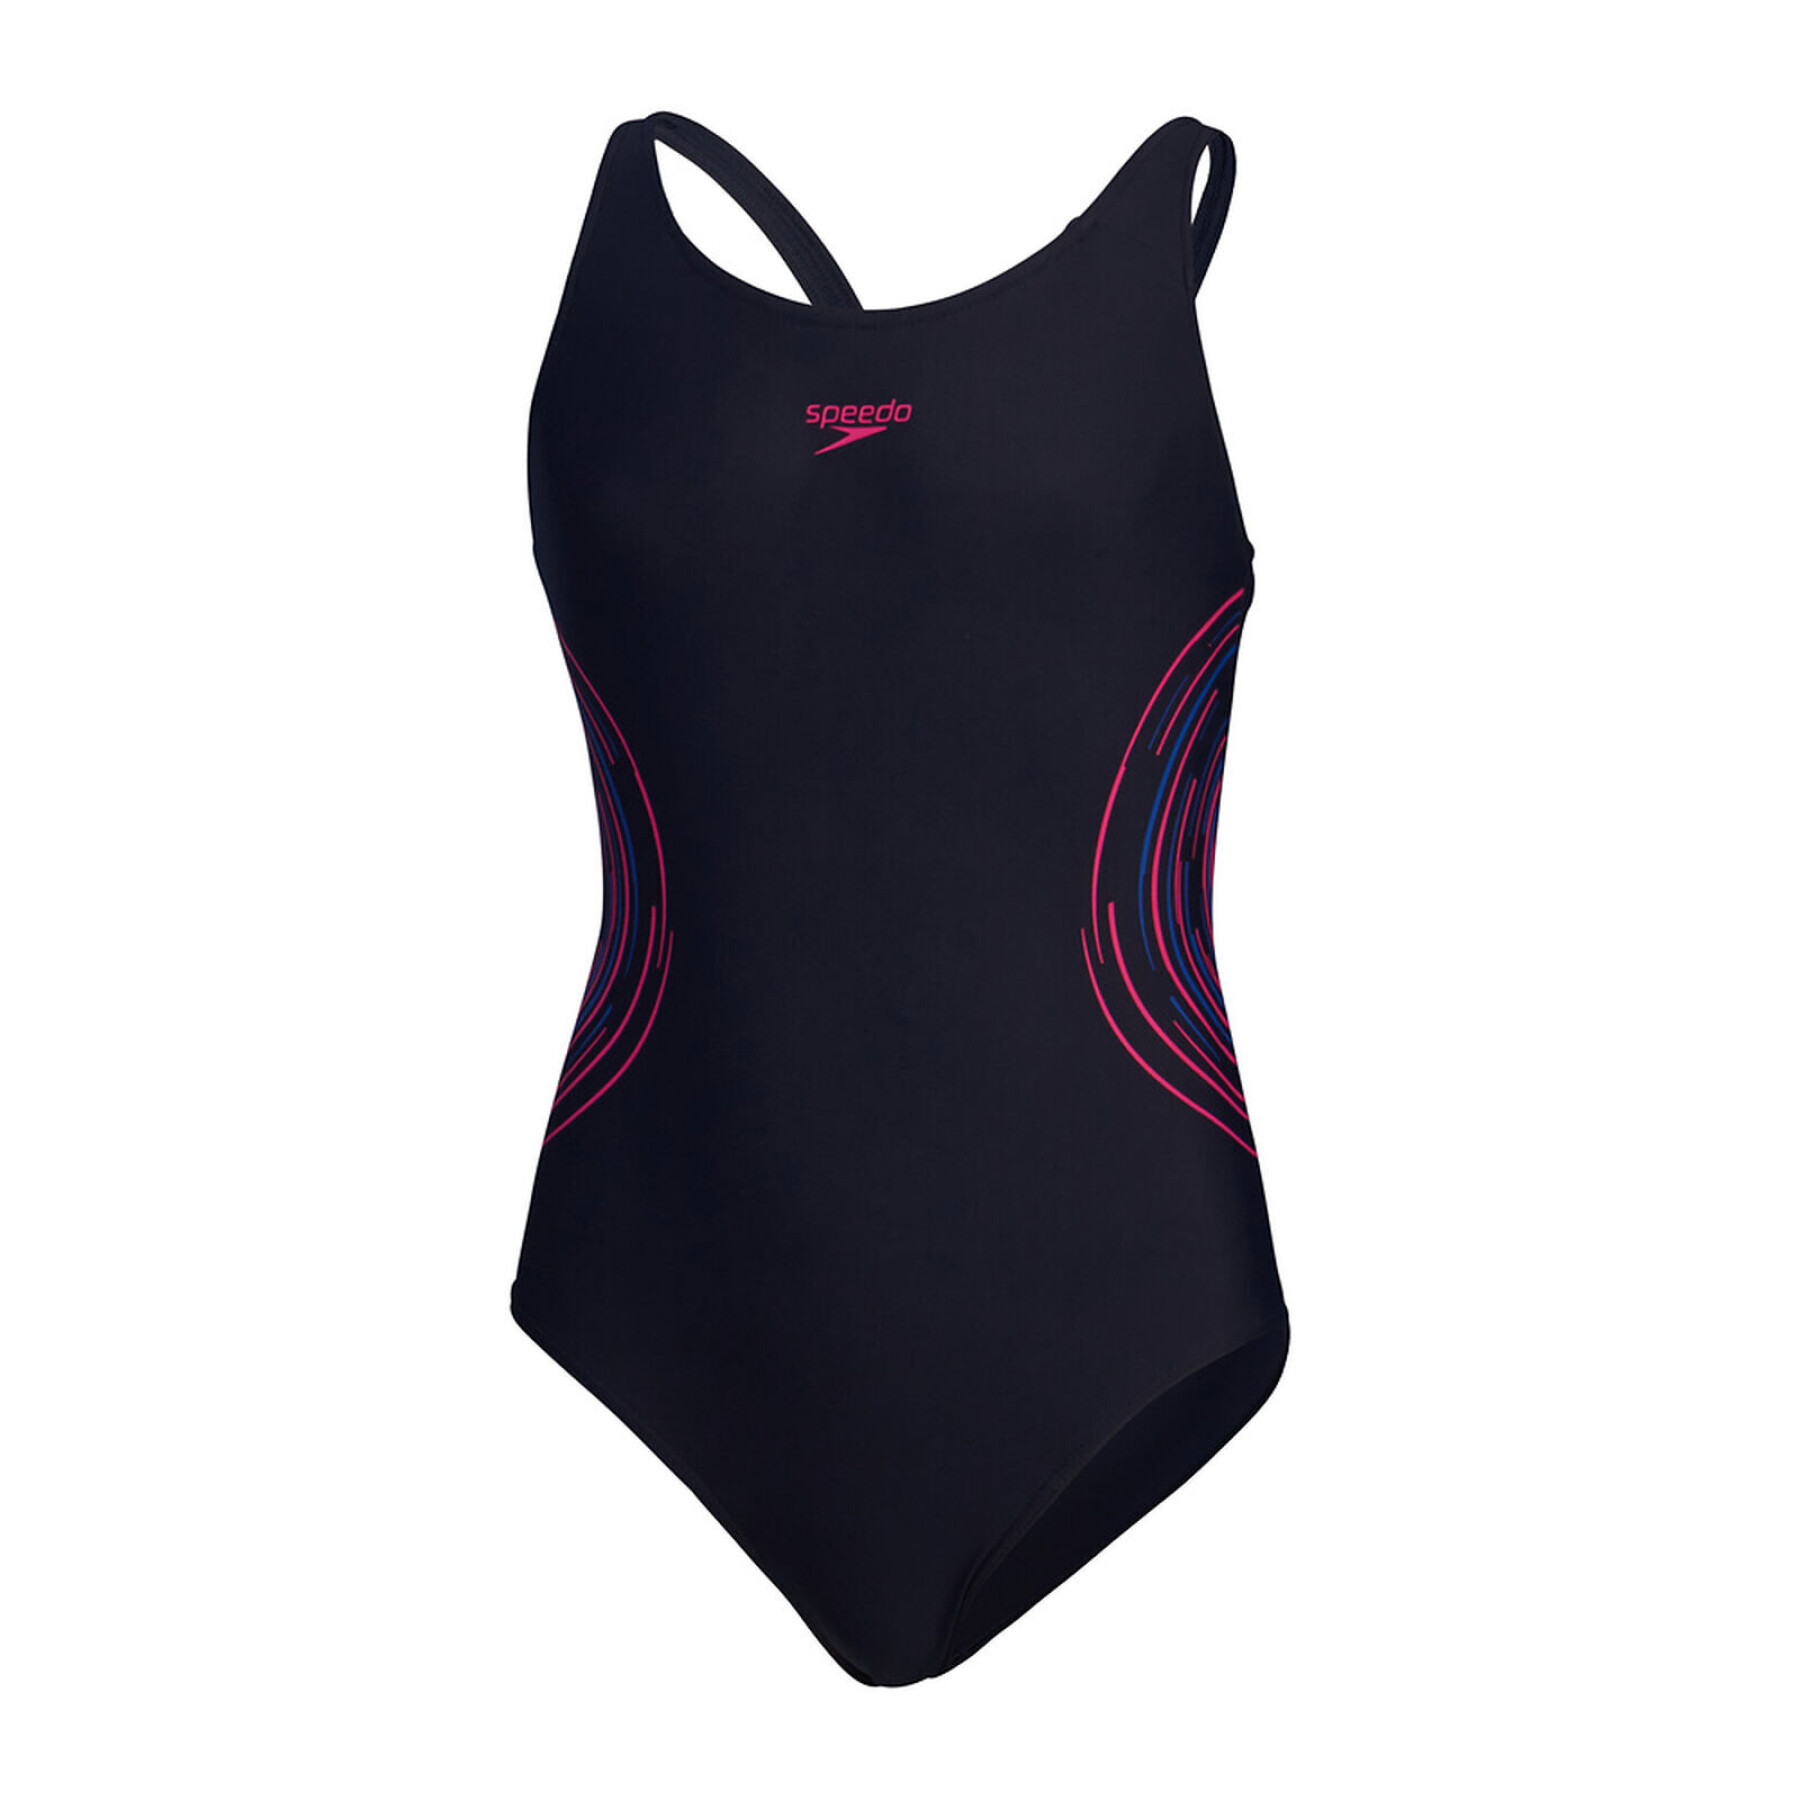 One-piece swimsuit for girls Speedo Placement Muscleback